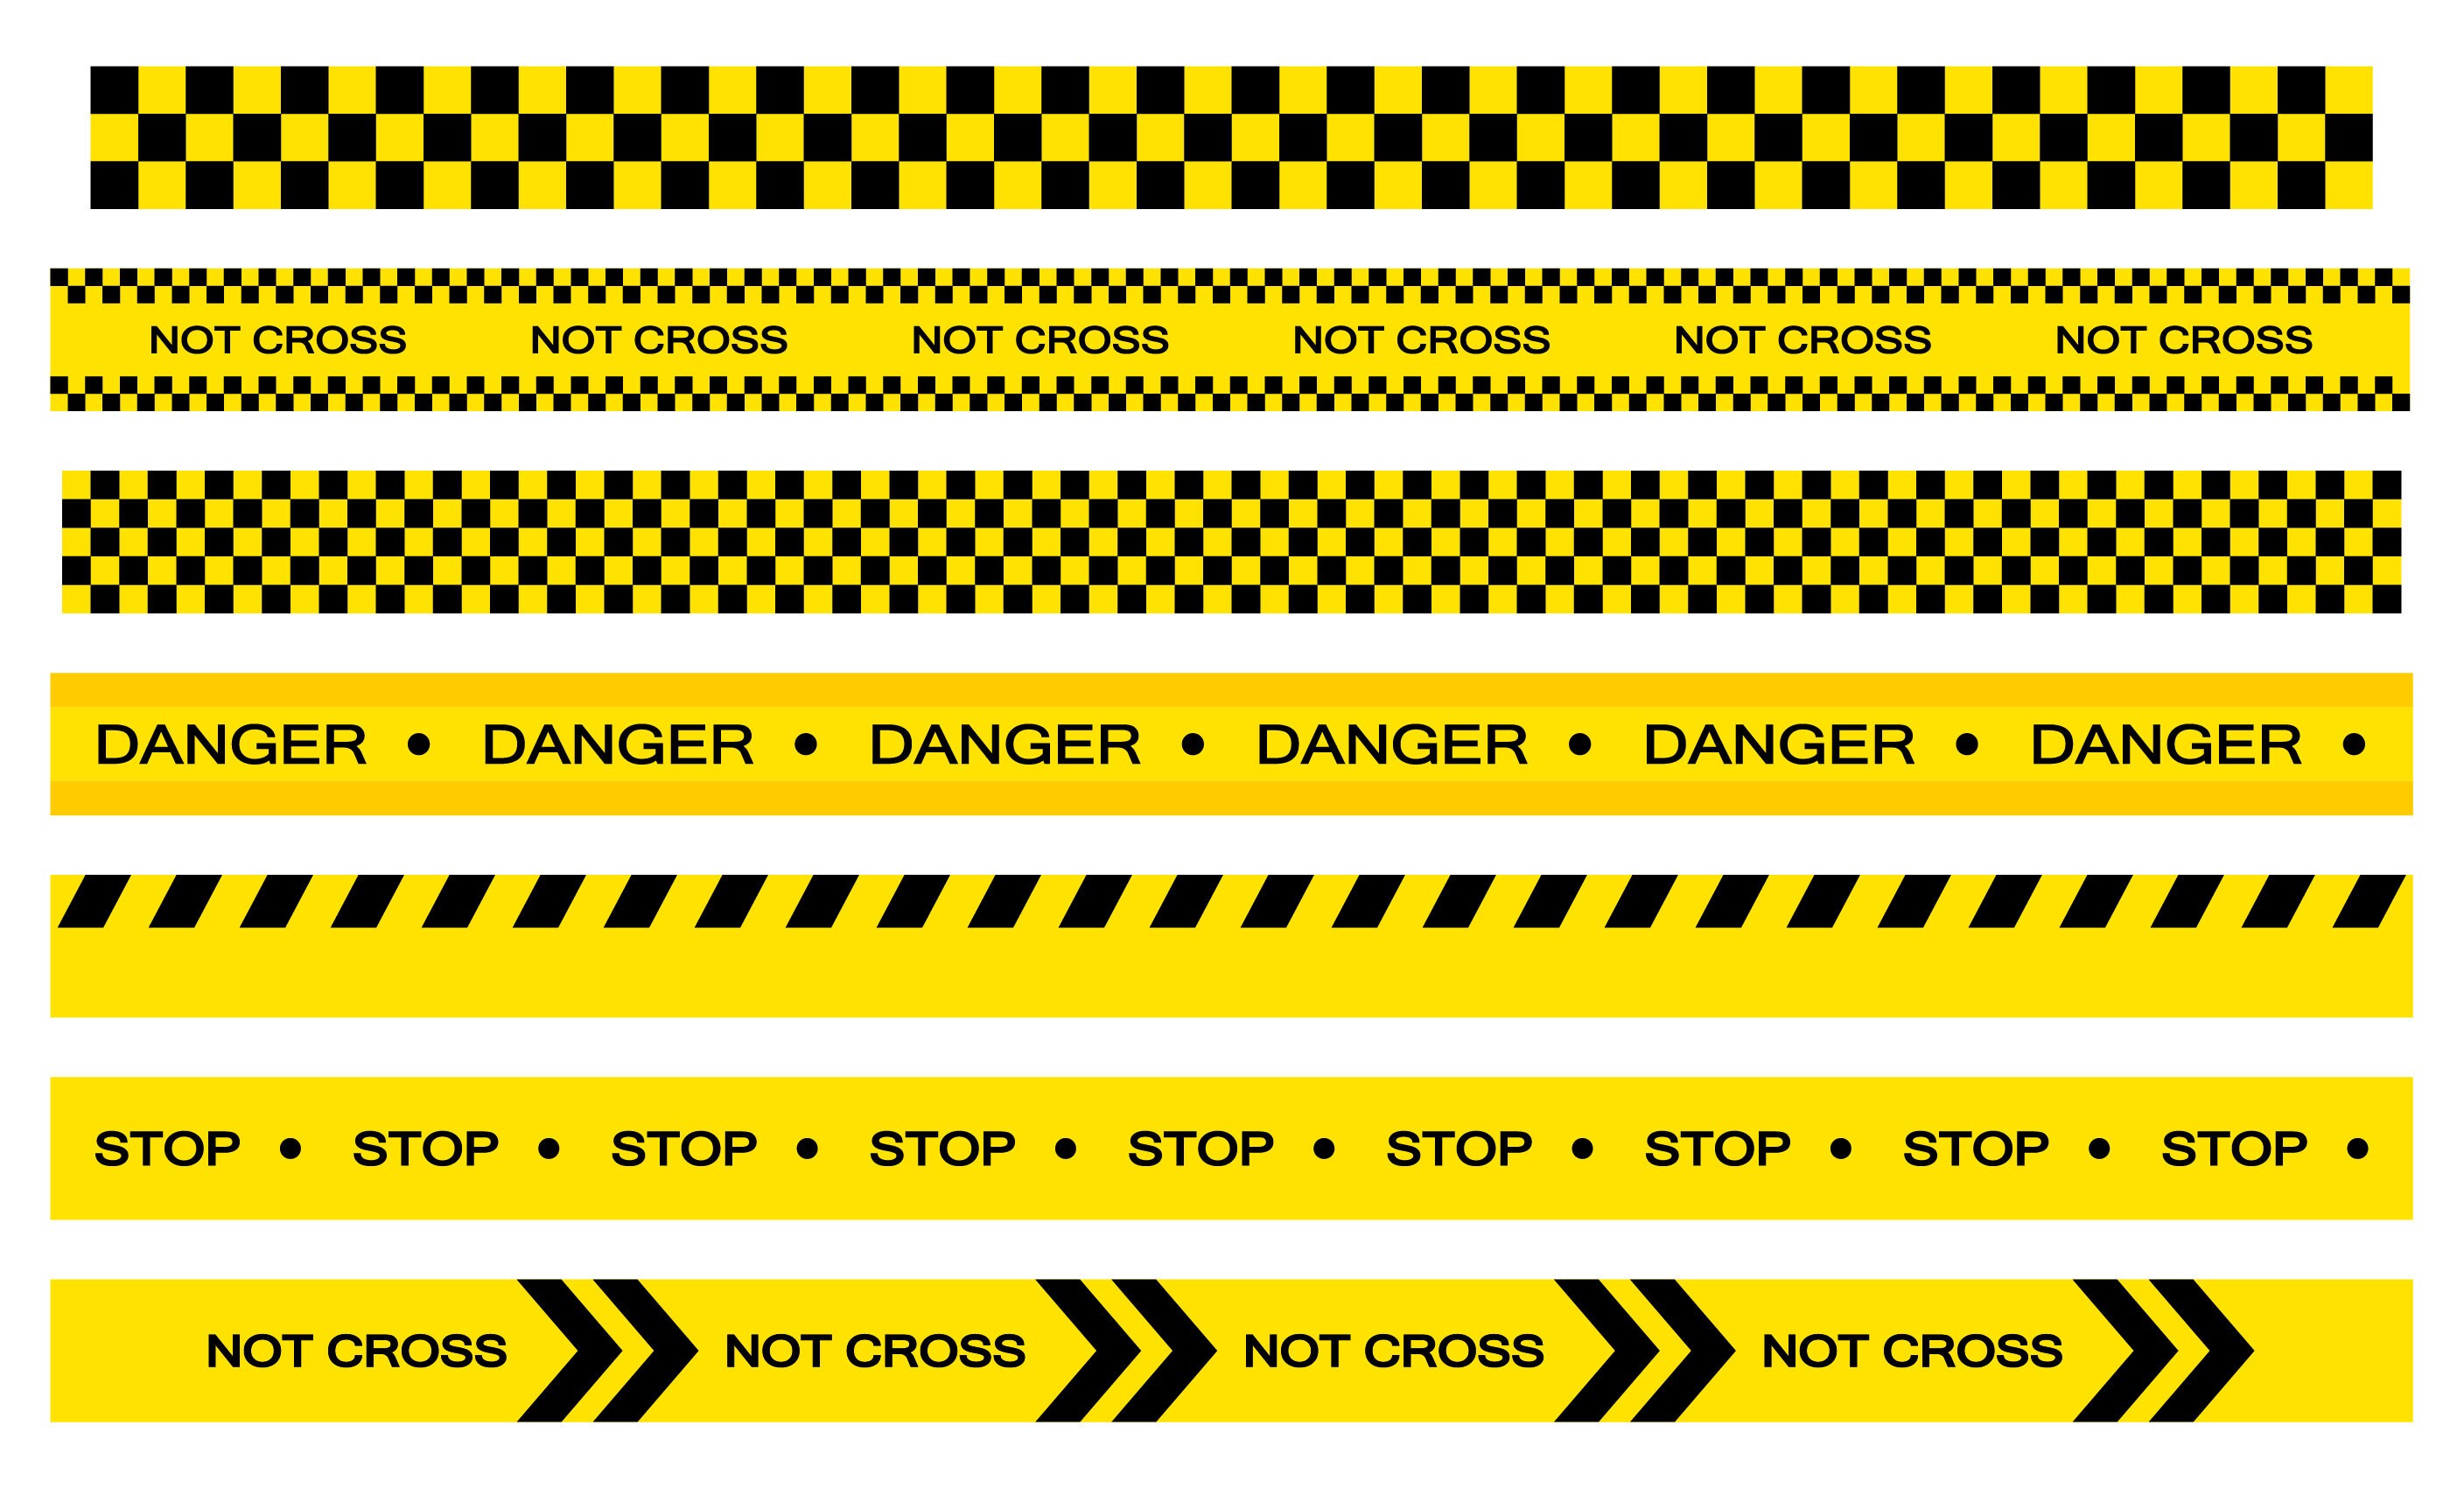 Caution tape police tape hazard warning Poster for Sale by